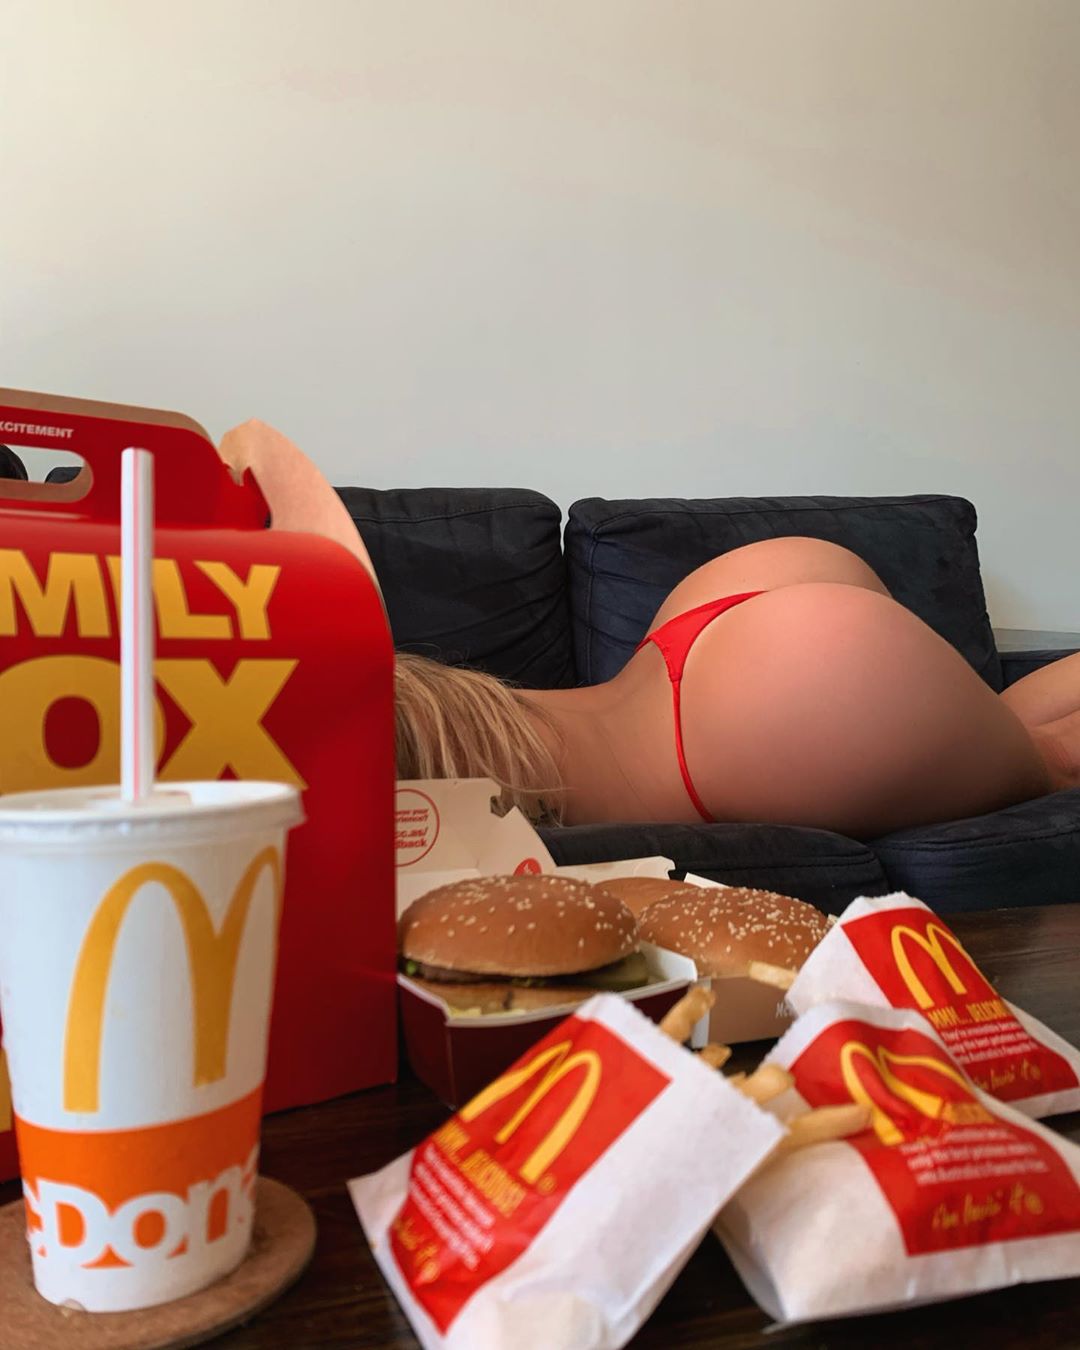 Mcdonalds Porn - What McDonald's includes that in the family box meal?! Porn Pic - EPORNER